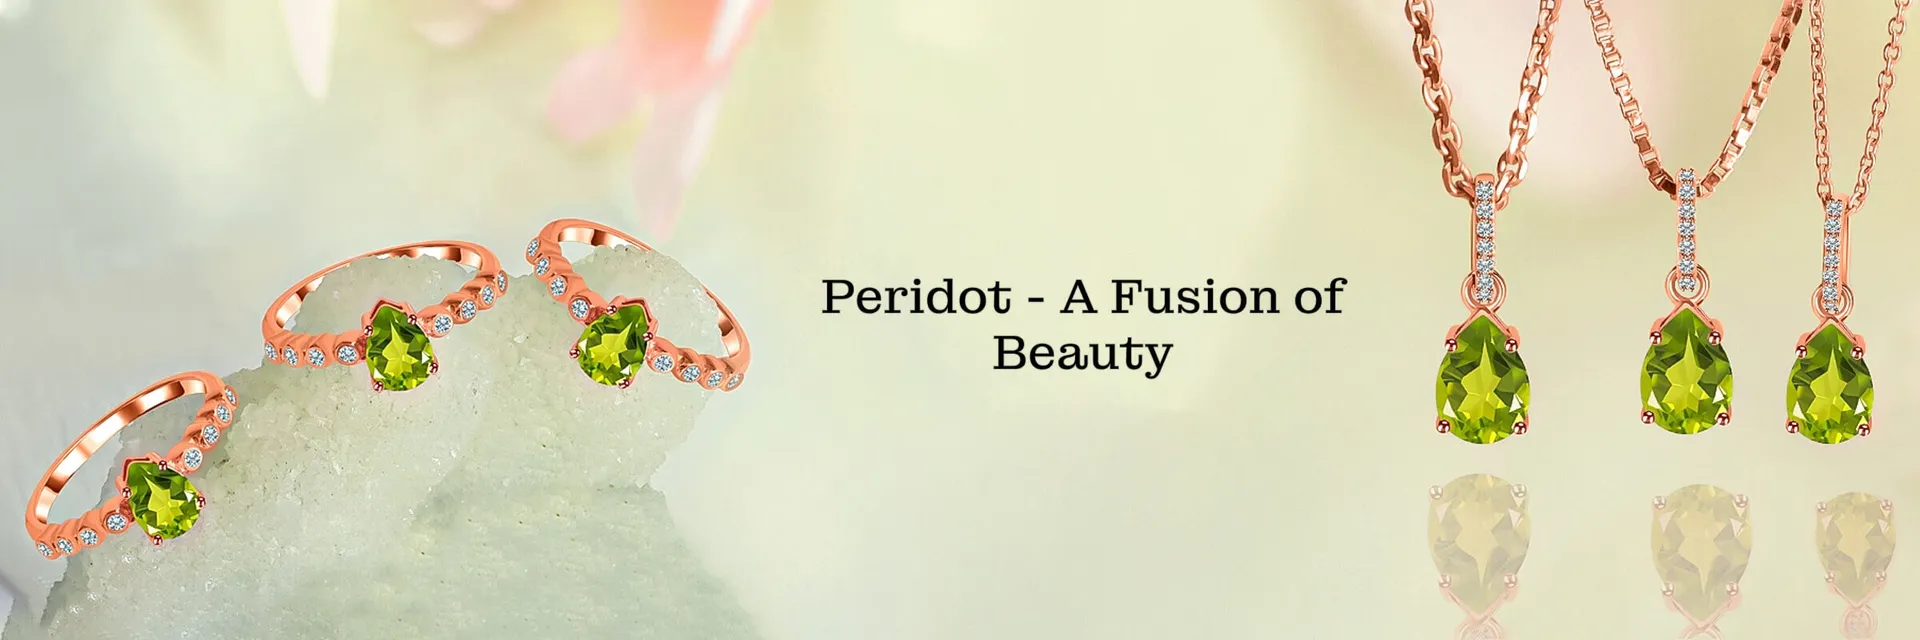 Peridot Gemstone - A Perfect Fusion of Beauty

Visit Now:- https://www.rananjayexports.com/blog/peridot_gemstone_a_perfect_fusion_of_beauty

The olivine mineral family includes the attractive green peridot. The most well-known member of the olivine family is peridot. The French term peritôt, which signifies anything unclear, is where the name peridot first originated. Peridot seems hazy due to its many inclusions and interior cracks. Peridot is referred to as chrysolite in old German. Due to its strength and beauty, peridot is often referred to as the evening Emerald. It also goes by the name olivine occasionally, and it only comes in the shade of green. Peridot comes in a variety of colours, including olive and brownish green. Peridot frequently has an oily, greasy appearance on its surface. Many cultures have revered Peridot and have connected it to good fortune. Peridot pairs well with the Sterling Silver Jewelry and can be donned as Peridot Ring, Peridot Pendant, Peridot Earrings, Peridot Necklace and Peridot Bracelet.